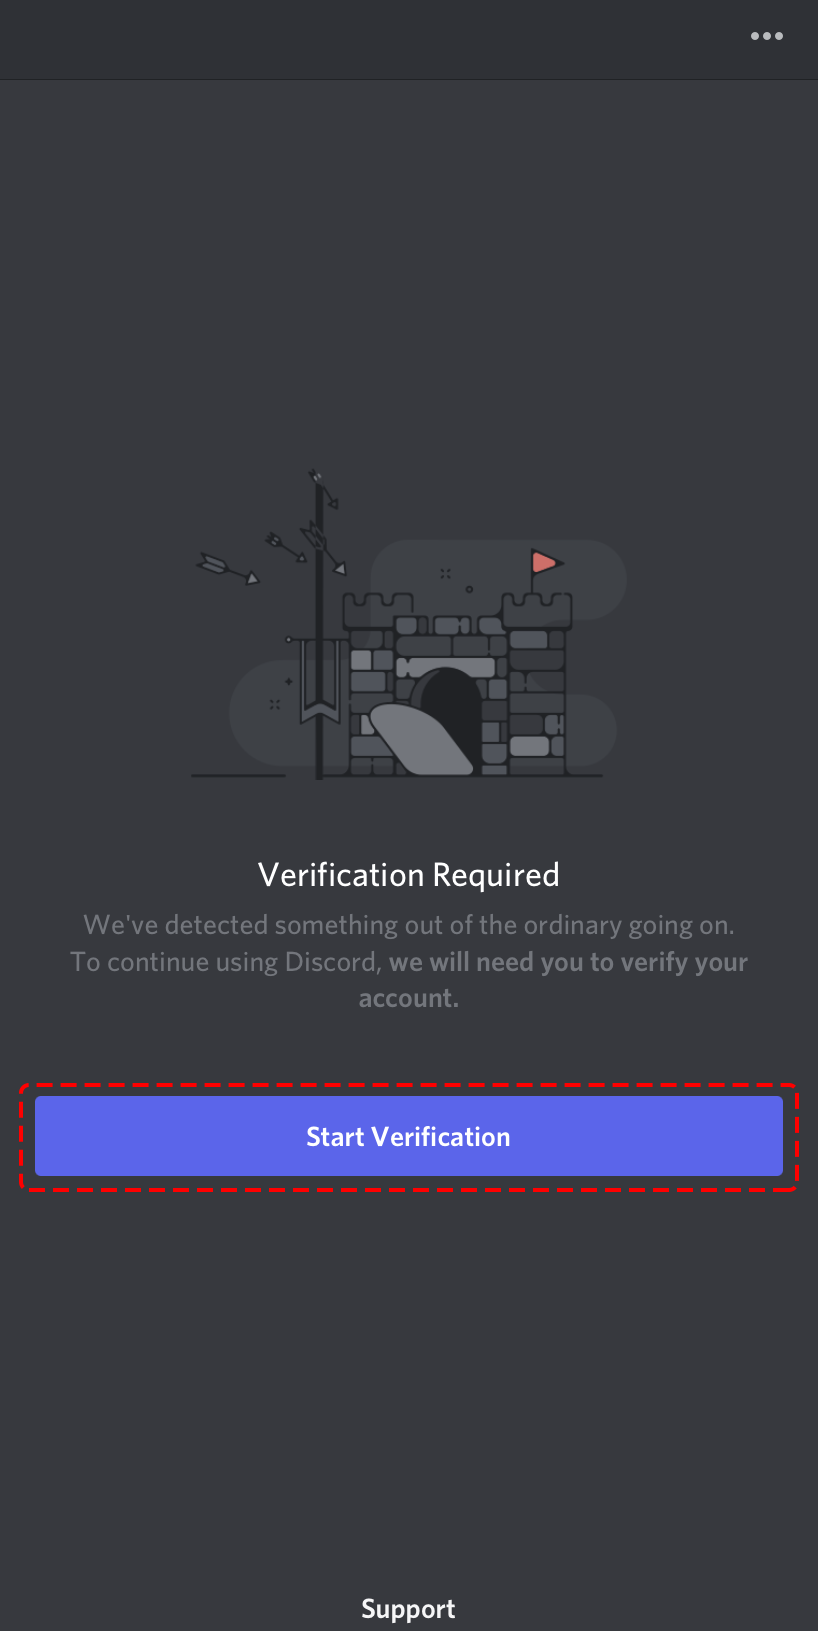 new-start-verification-button-mobile-screen.png